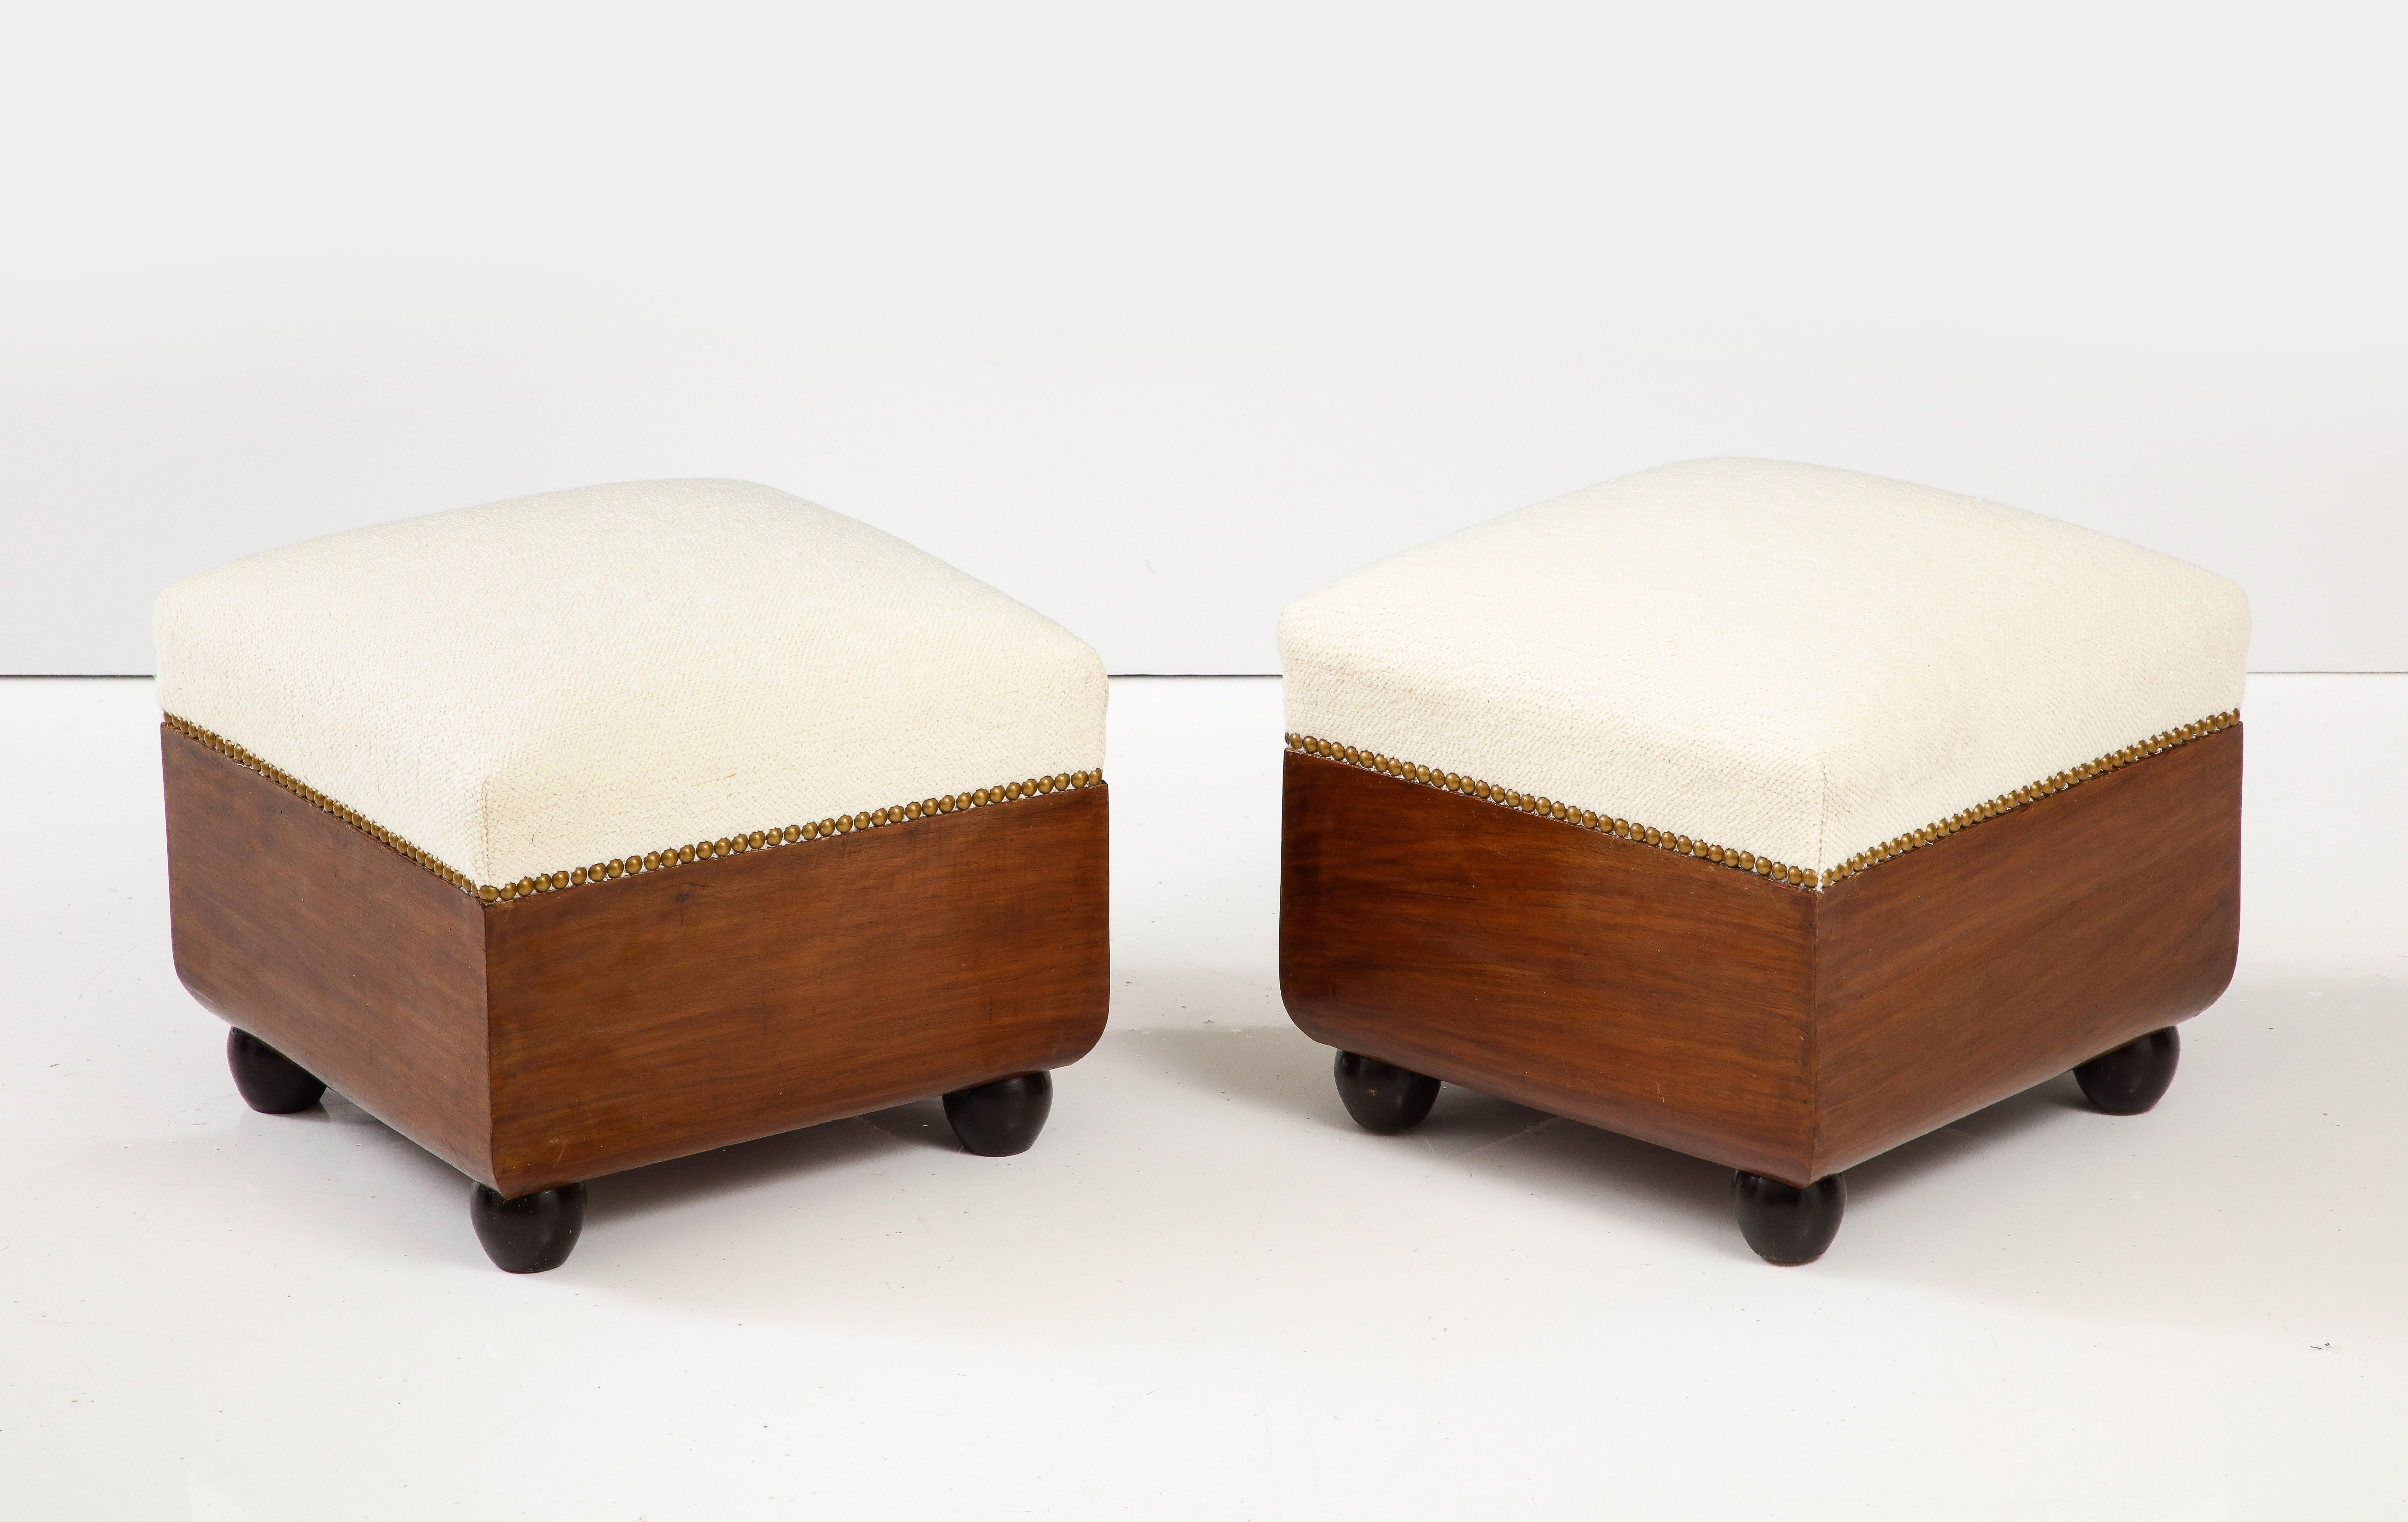 Italian 1920's Walnut Armchairs / Lounge Chairs with Foot Stools 6